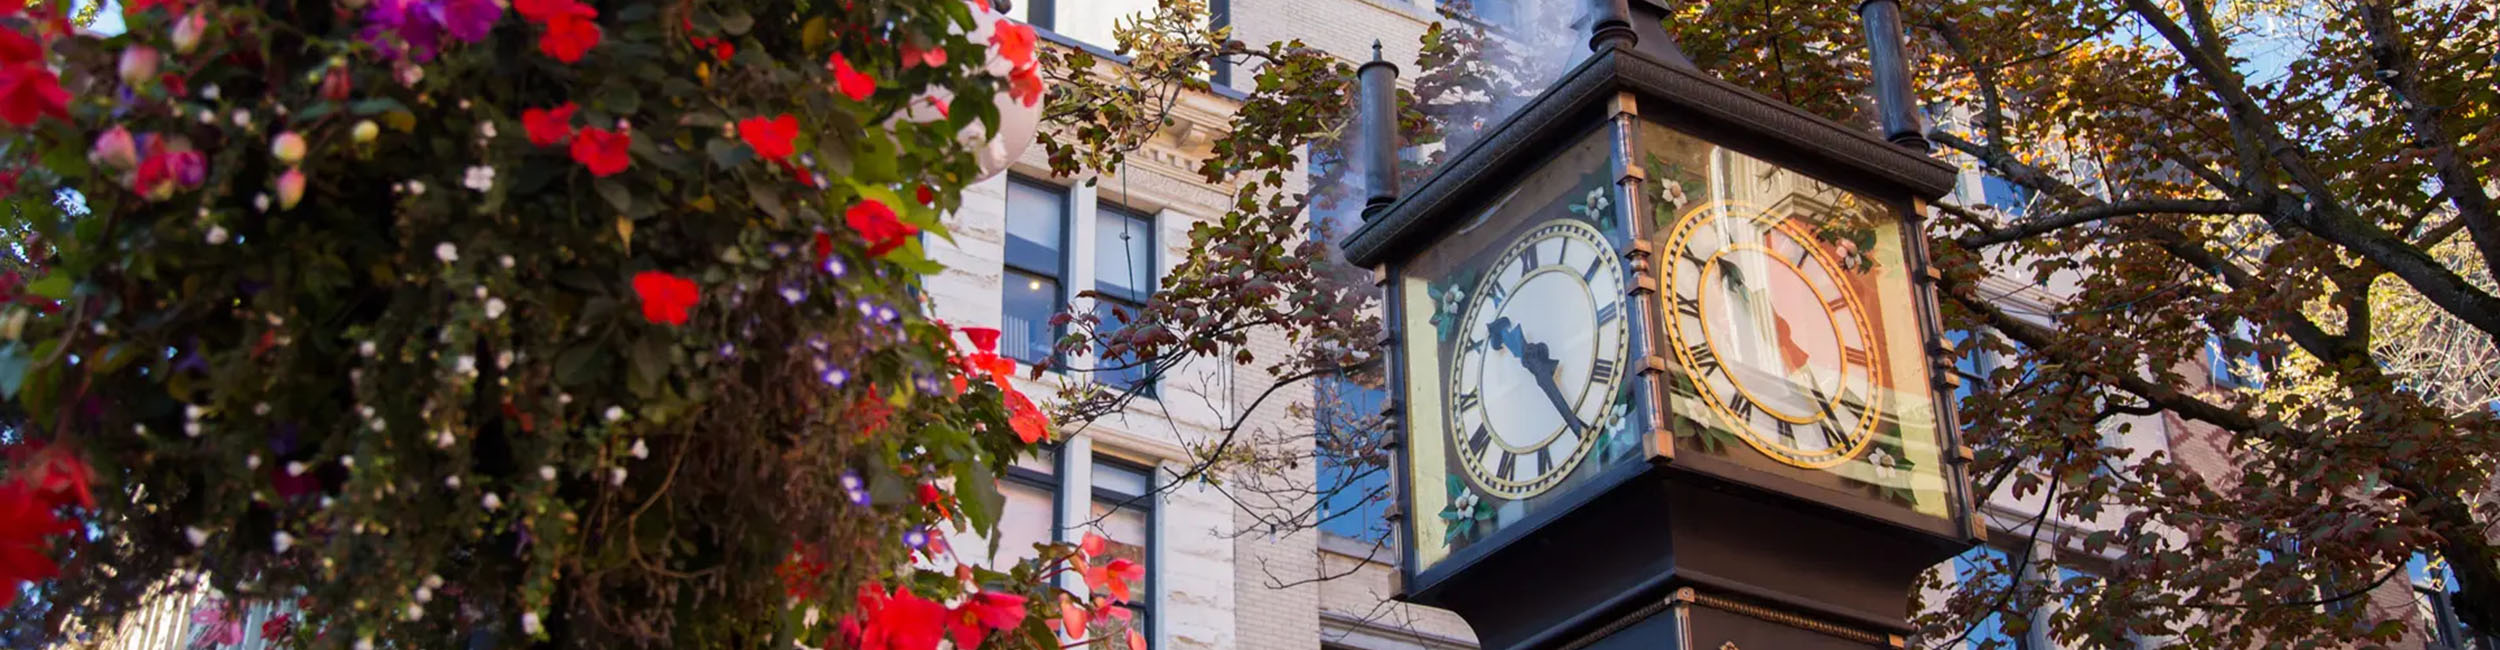 Gastown's iconic steam clock and some foliage